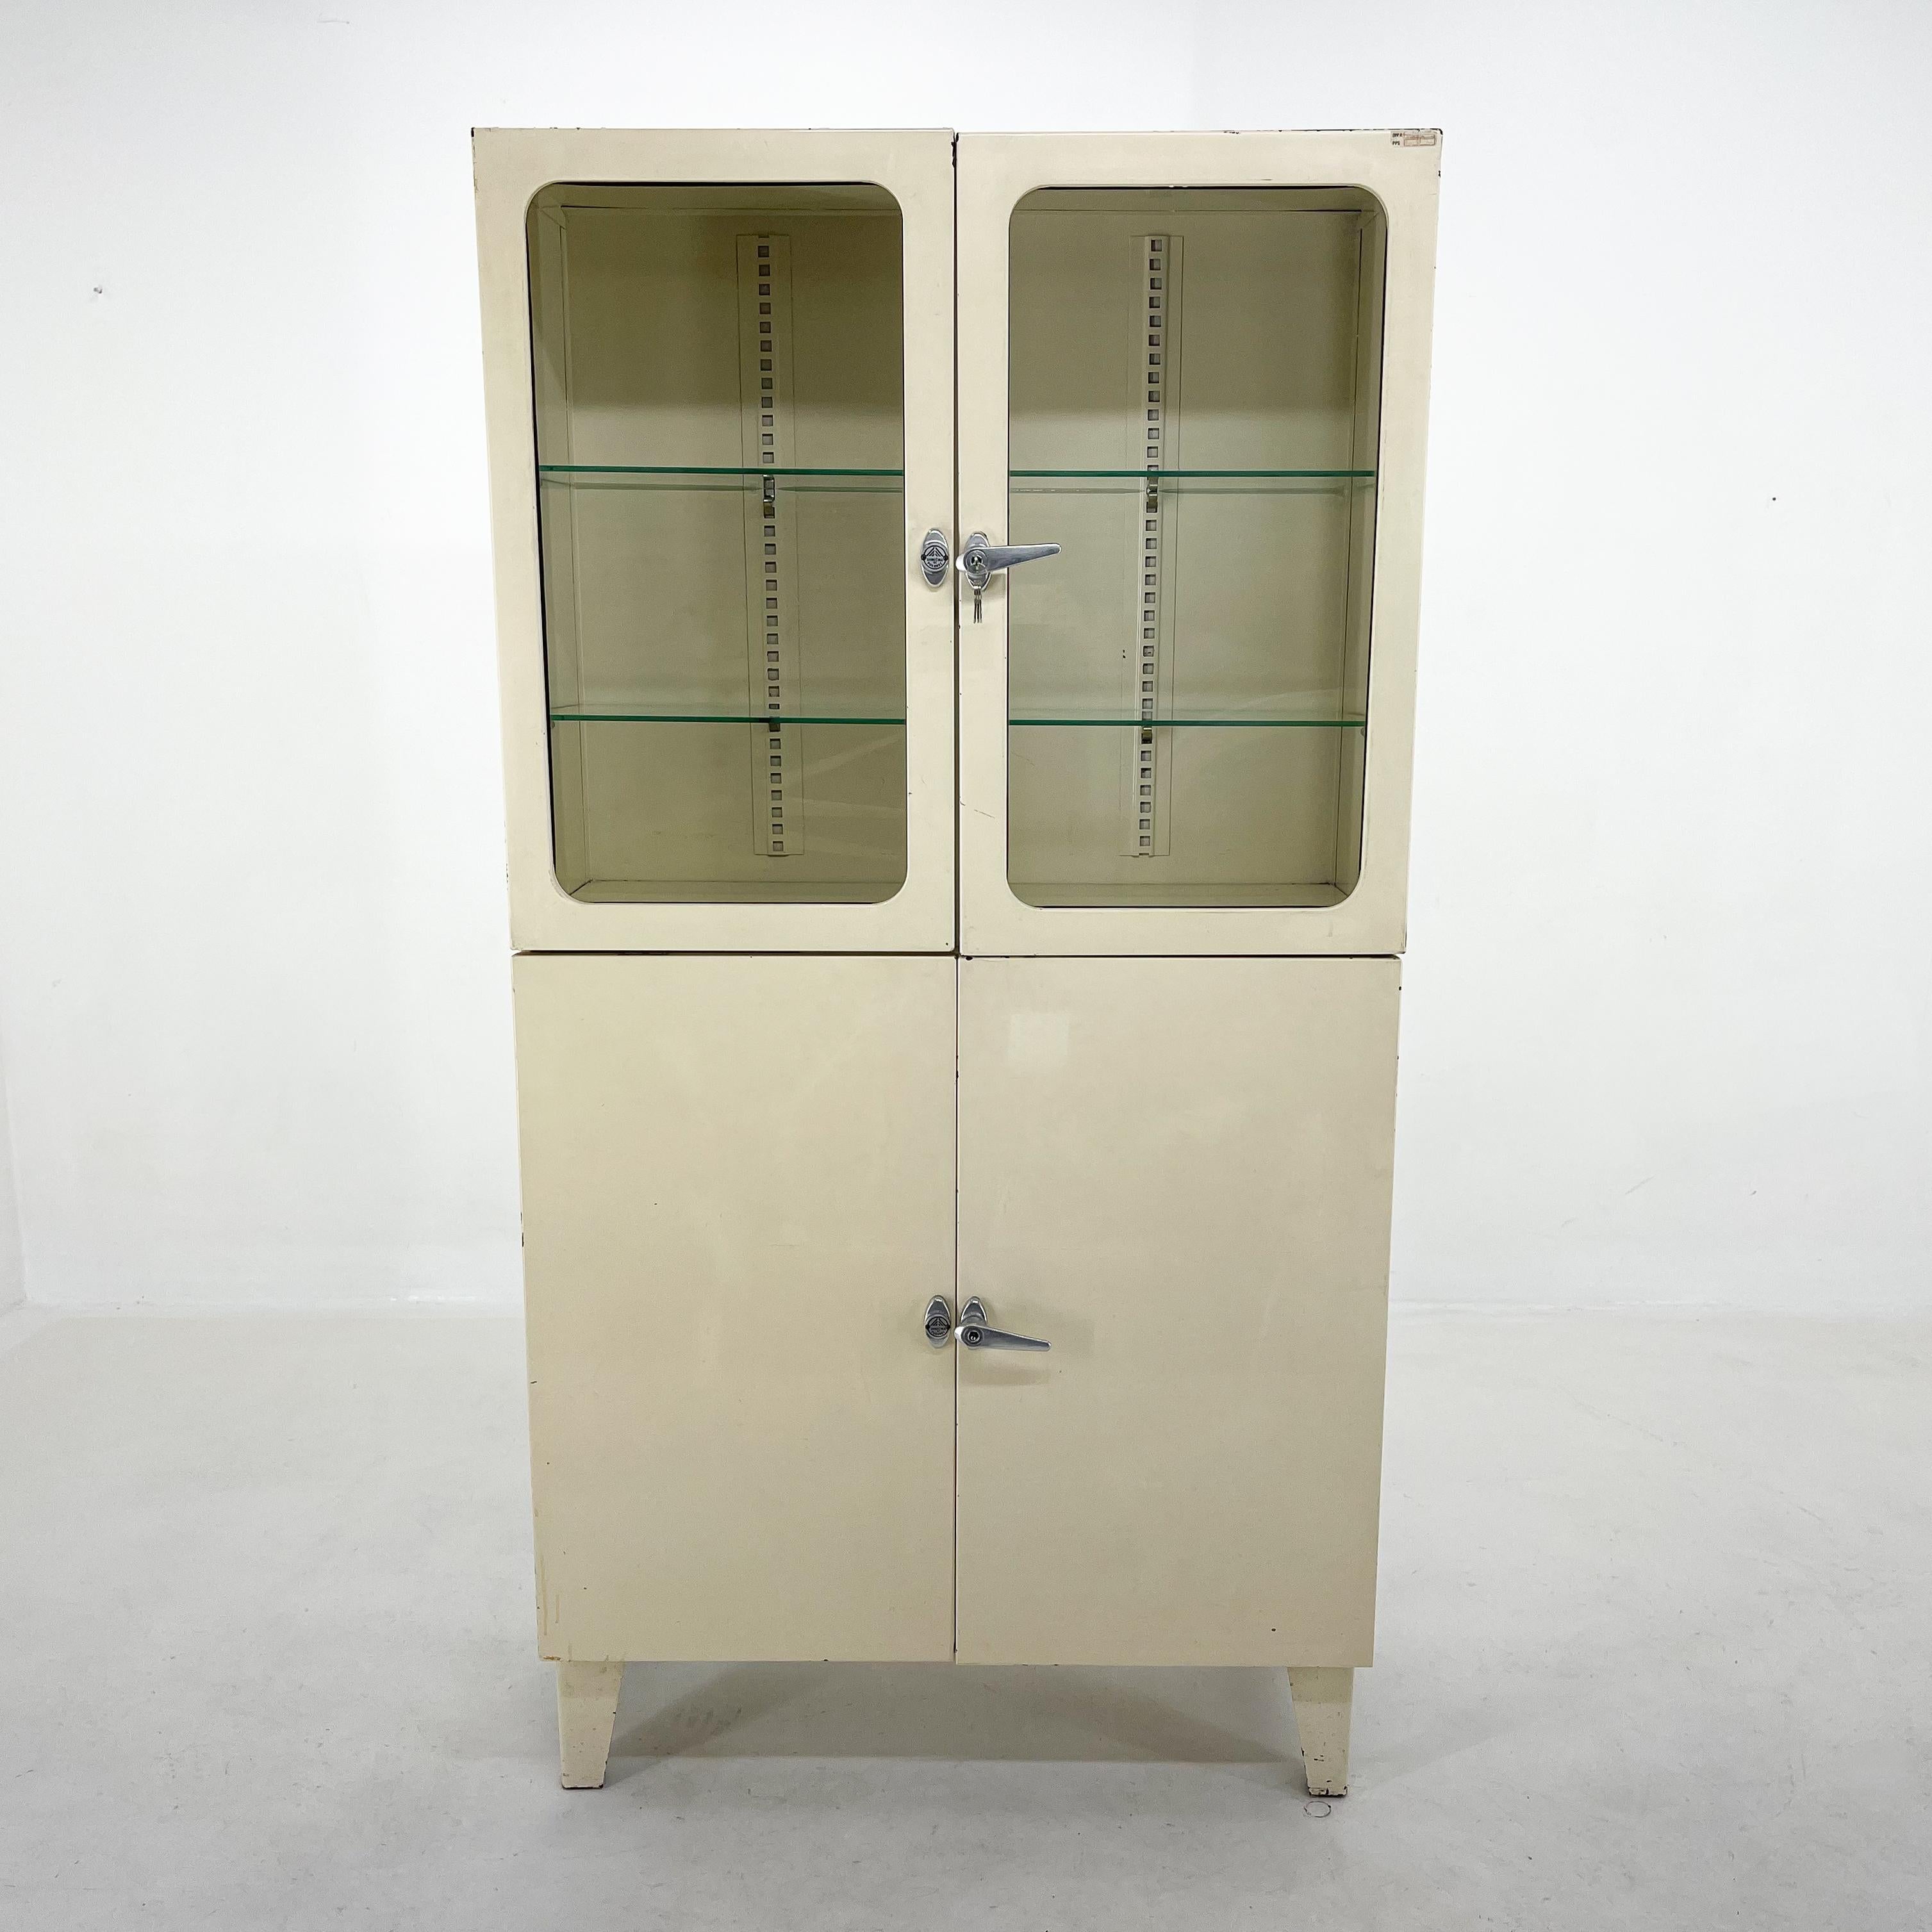 Vintage metal cabinet with two separate sections and glass shelves. Made by Smrecina OZ Pukavec in the former Czechoslovakia in the 1950's. The cabinet's doors are fully functional with original set of keys.